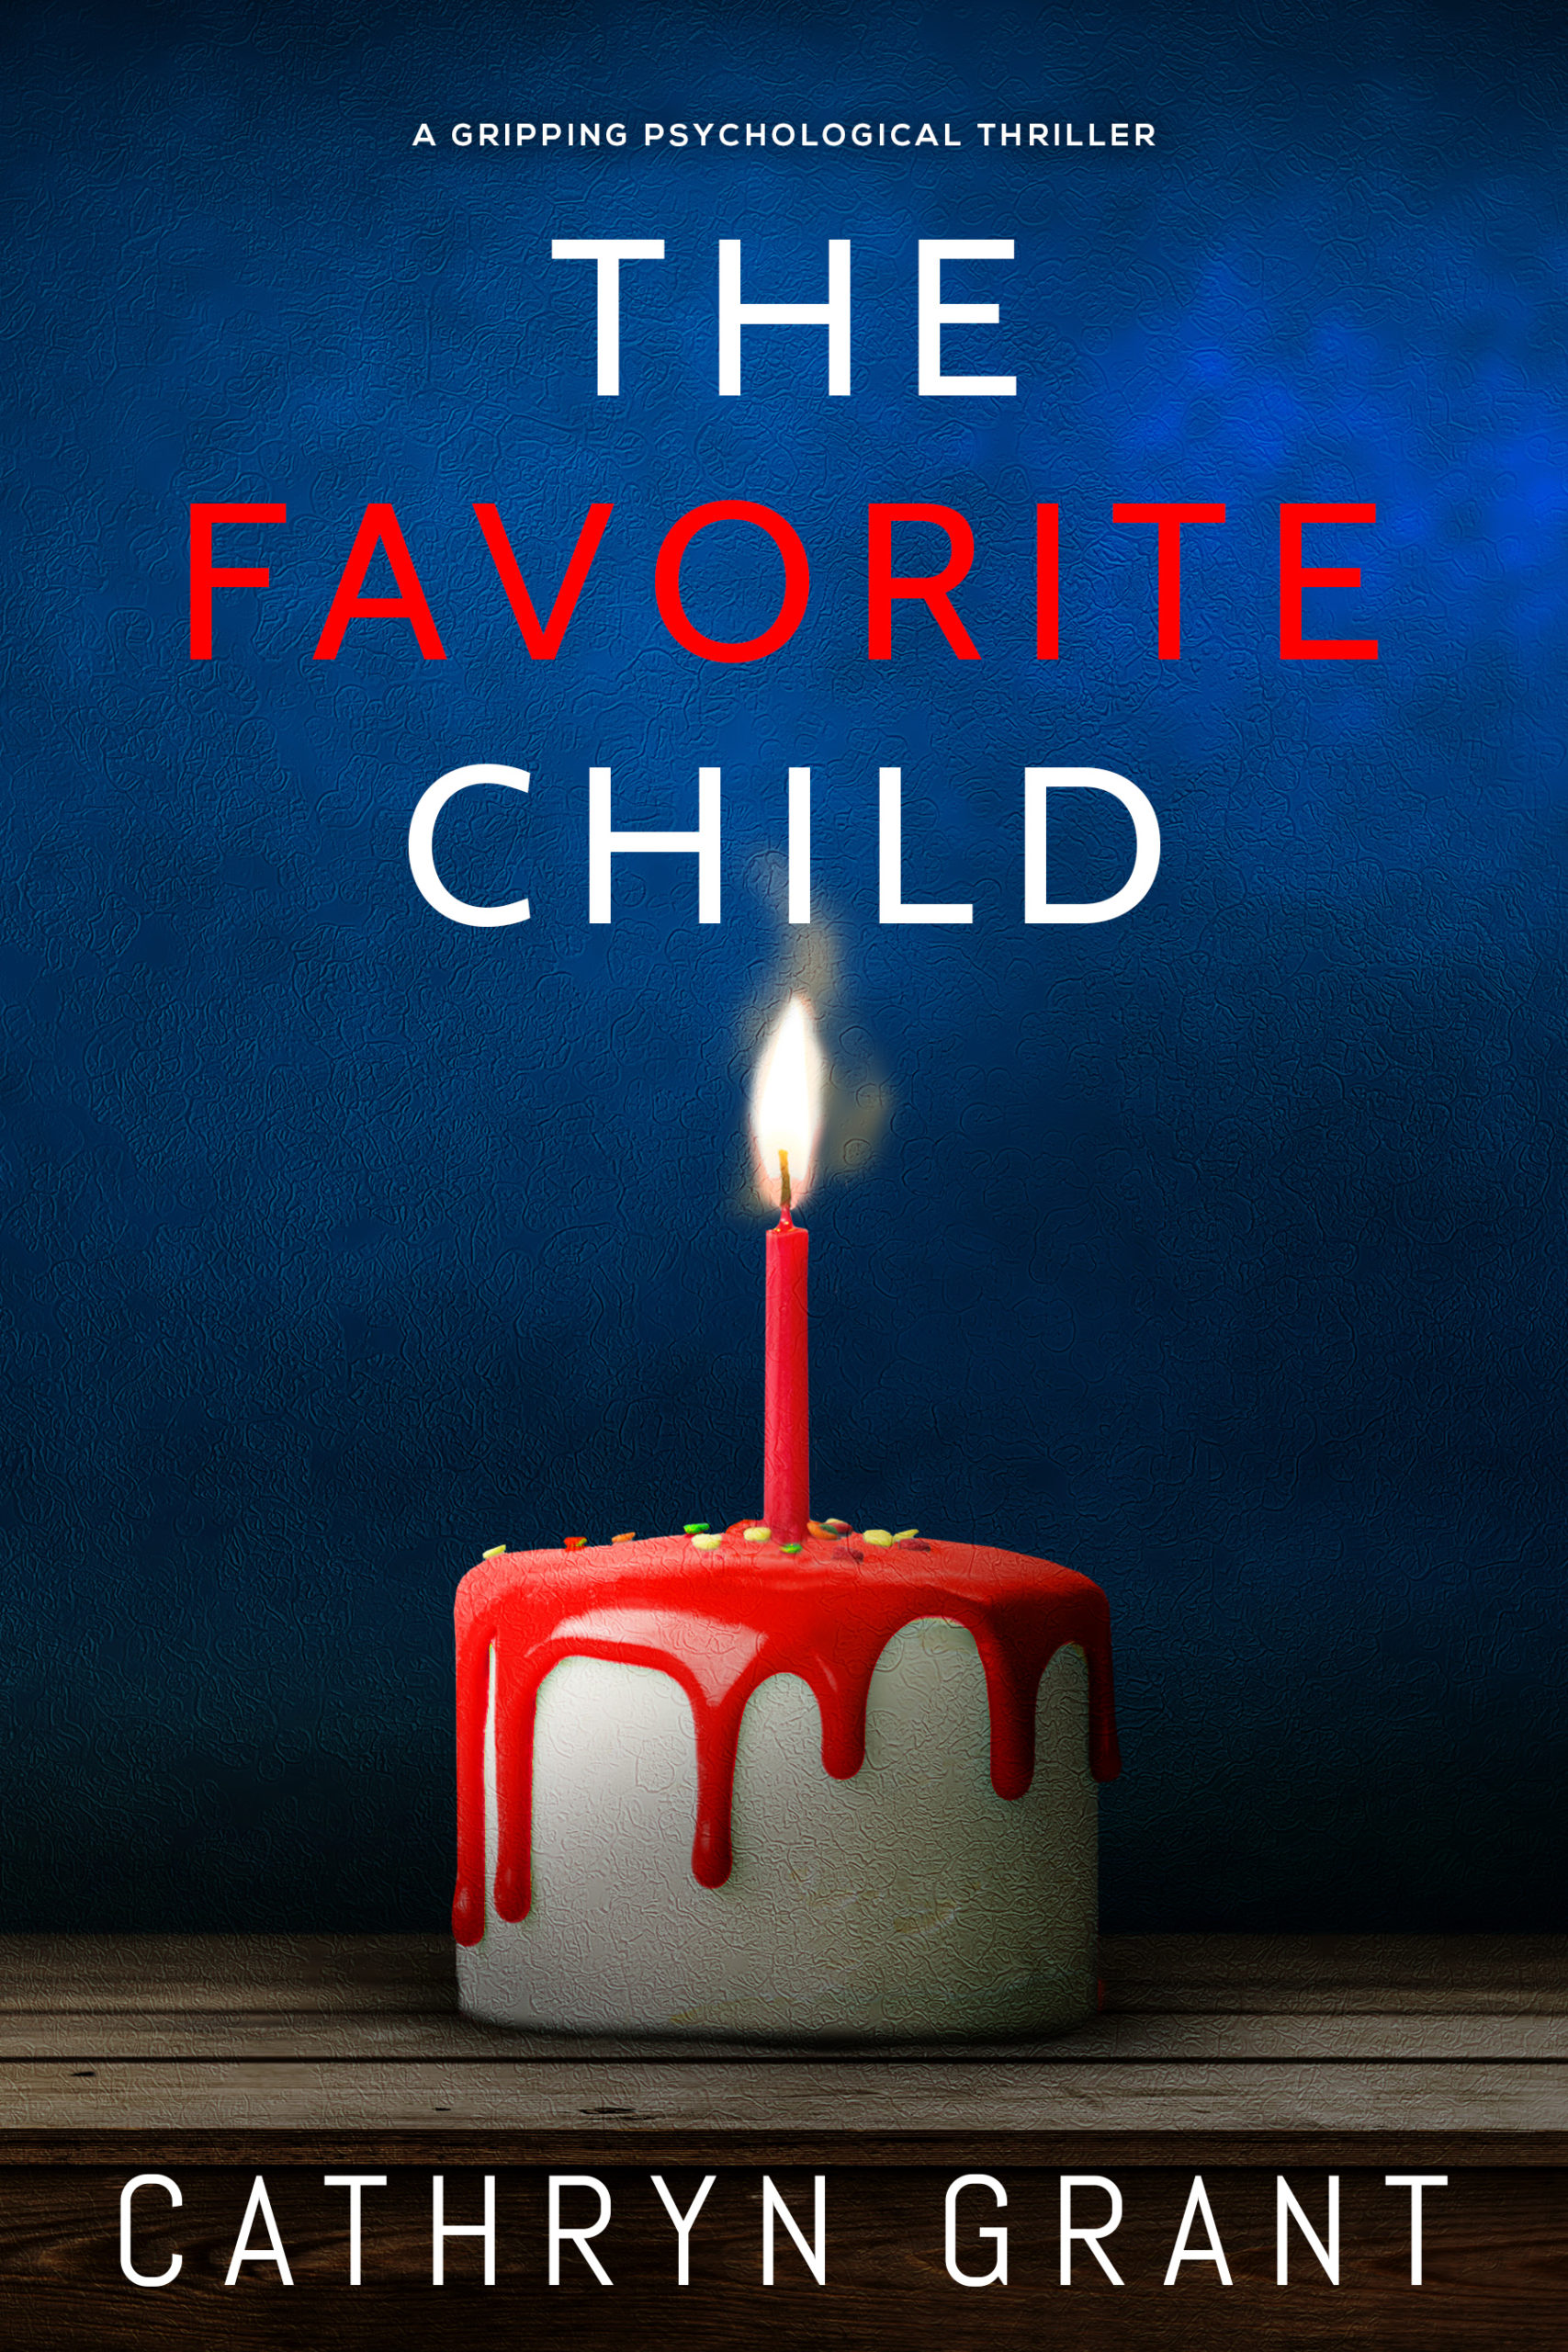 CATHRYN GRANT NEW RELEASE – THE FAVORITE CHILD